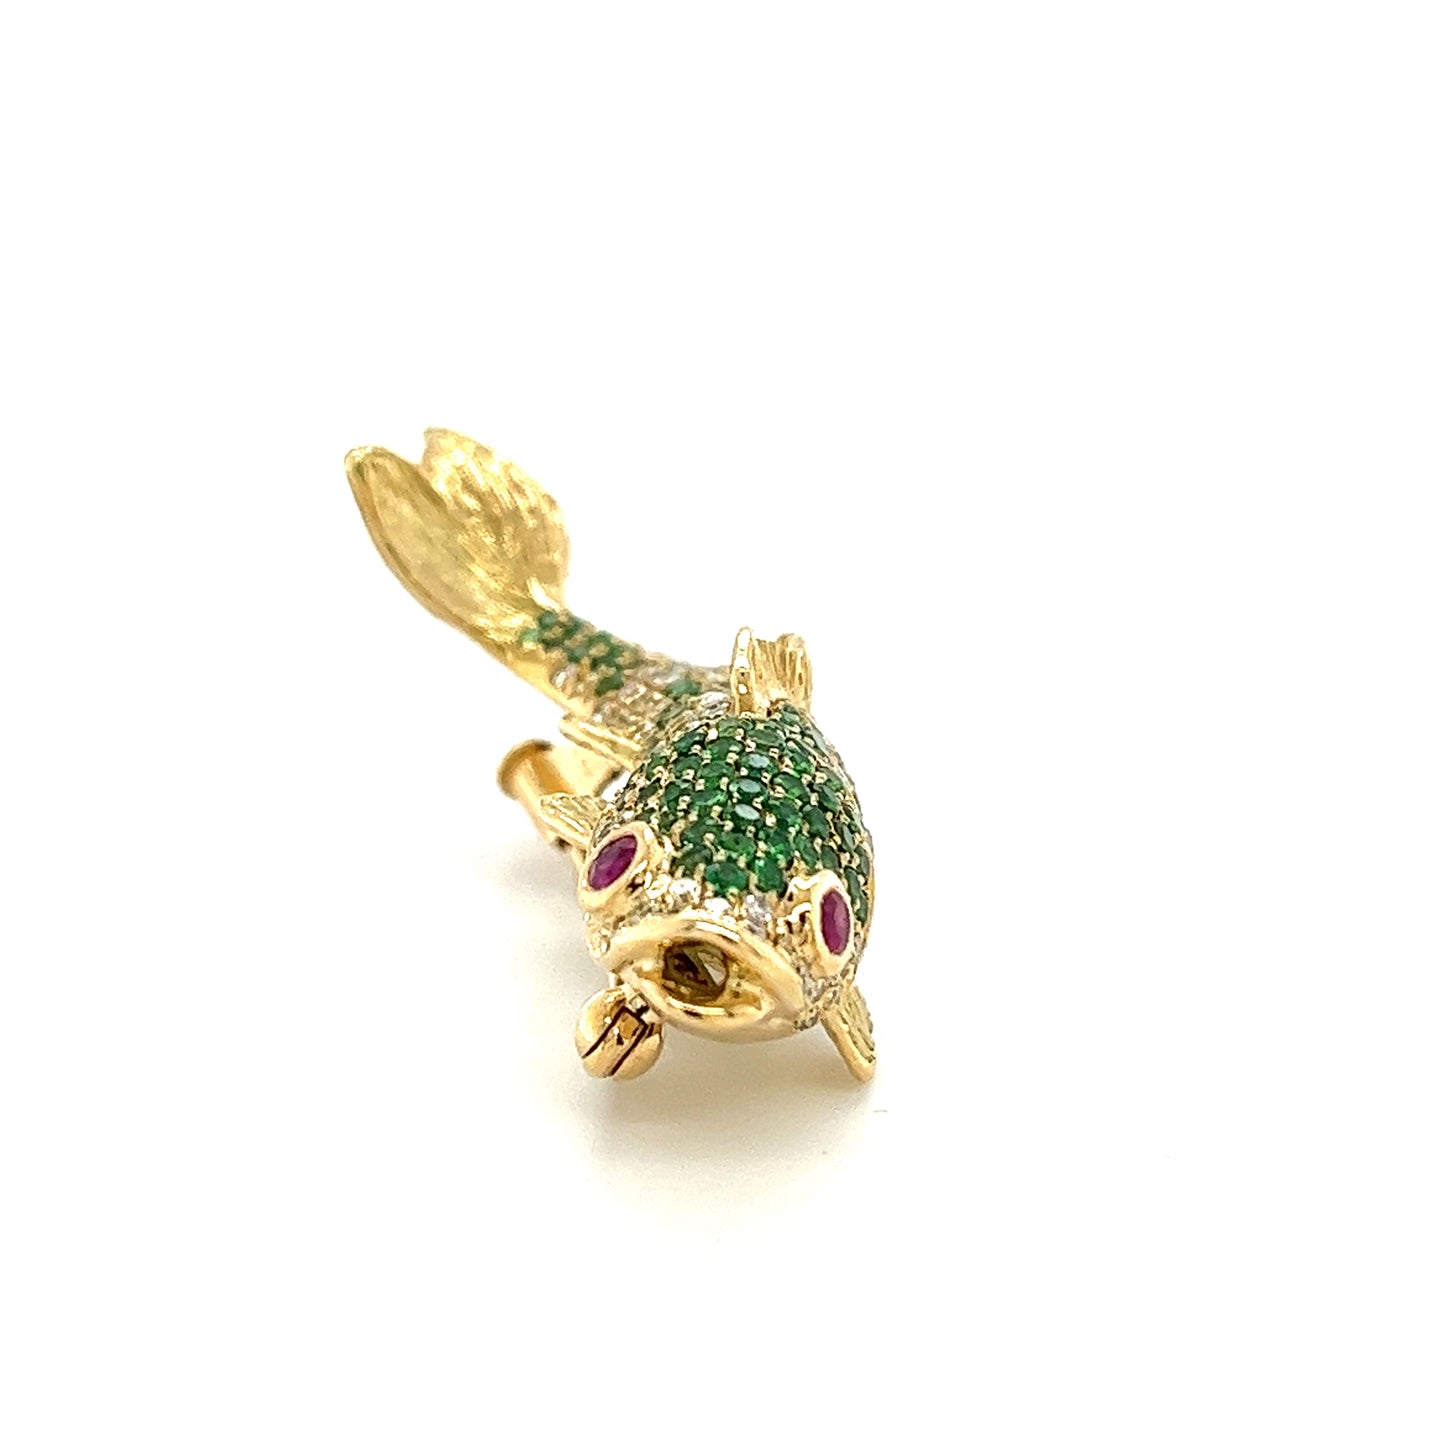 Load image into Gallery viewer, 18K Gold Fish Brooch with Diamonds Green Garnets and Rubies
